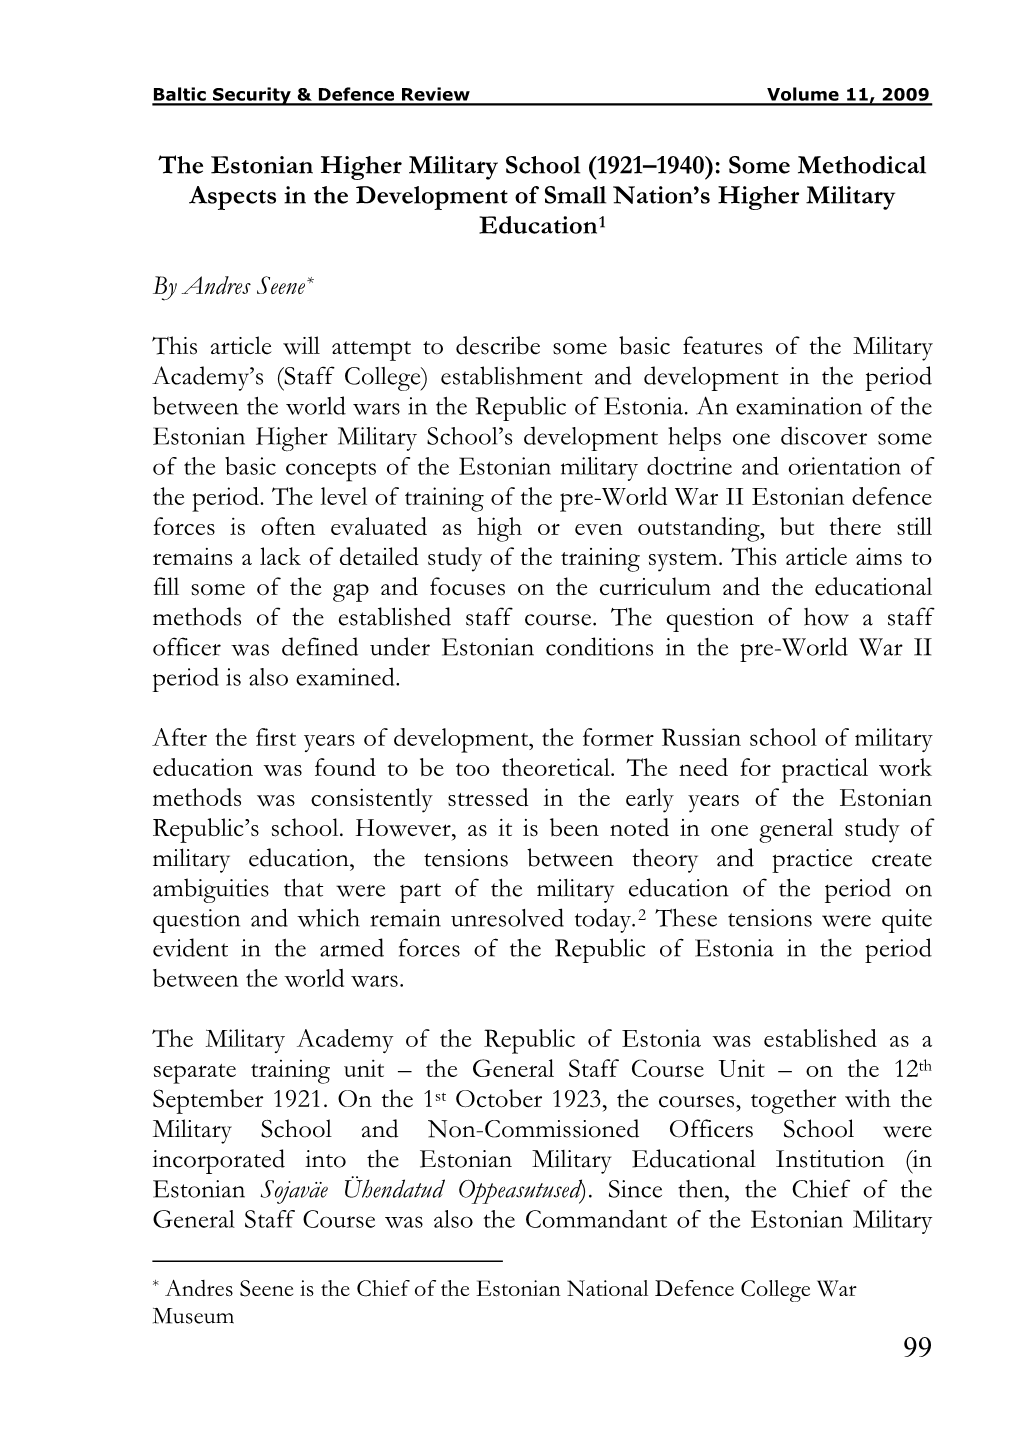 The Estonian Higher Military School (1921–1940): Some Methodical Aspects in the Development of Small Nation’S Higher Military Education1